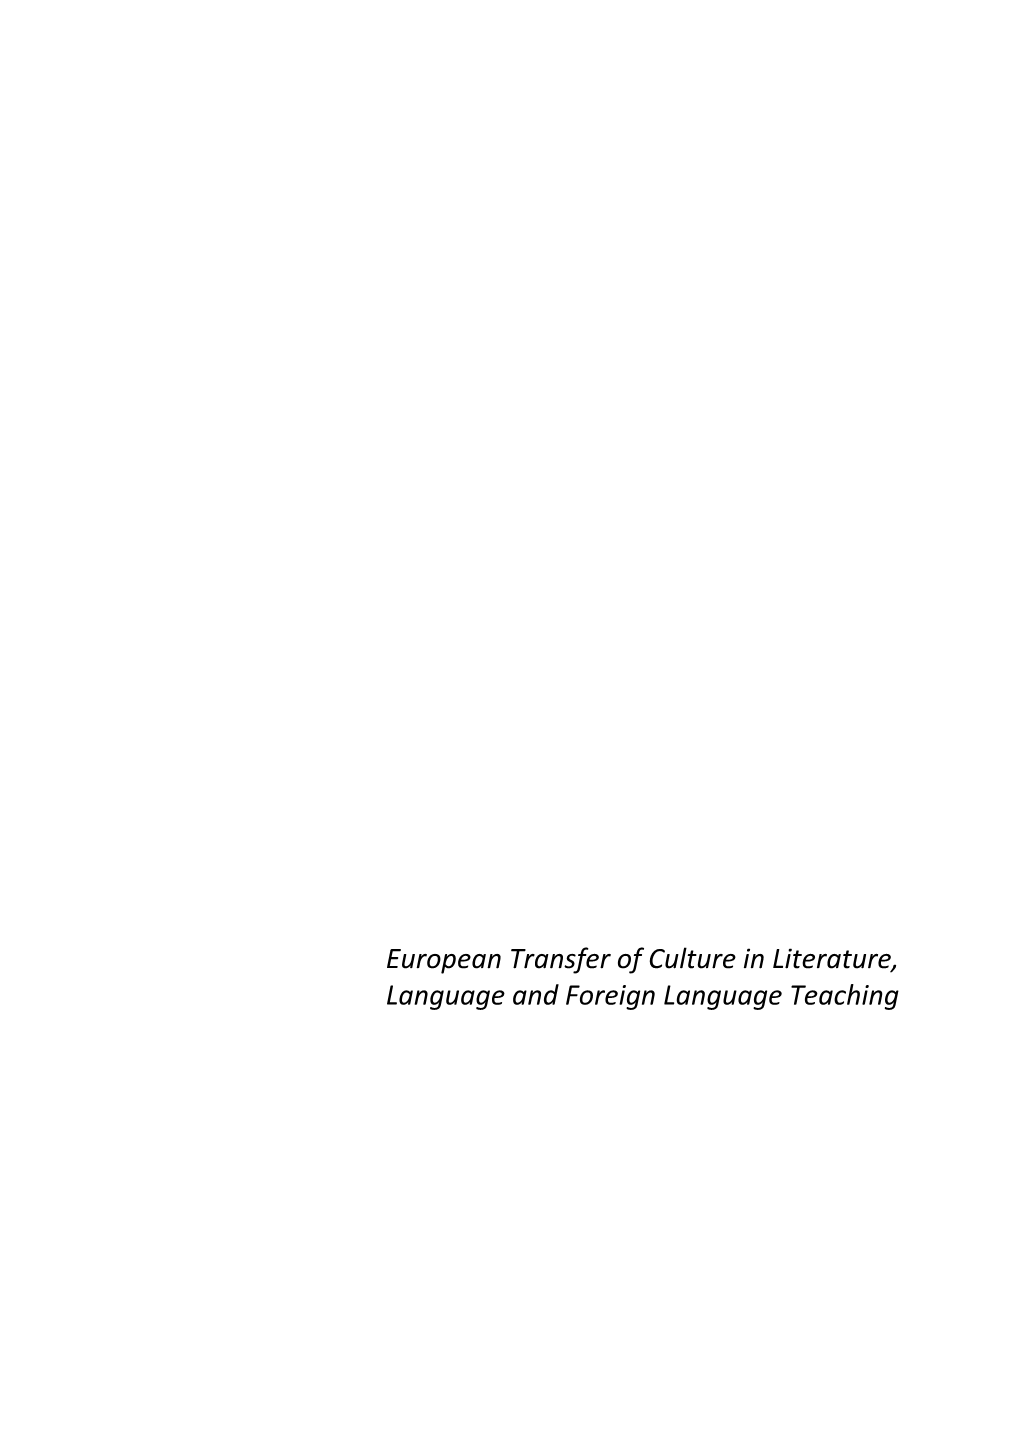 European Transfer of Culture in Literature, Language and Foreign Language Teaching